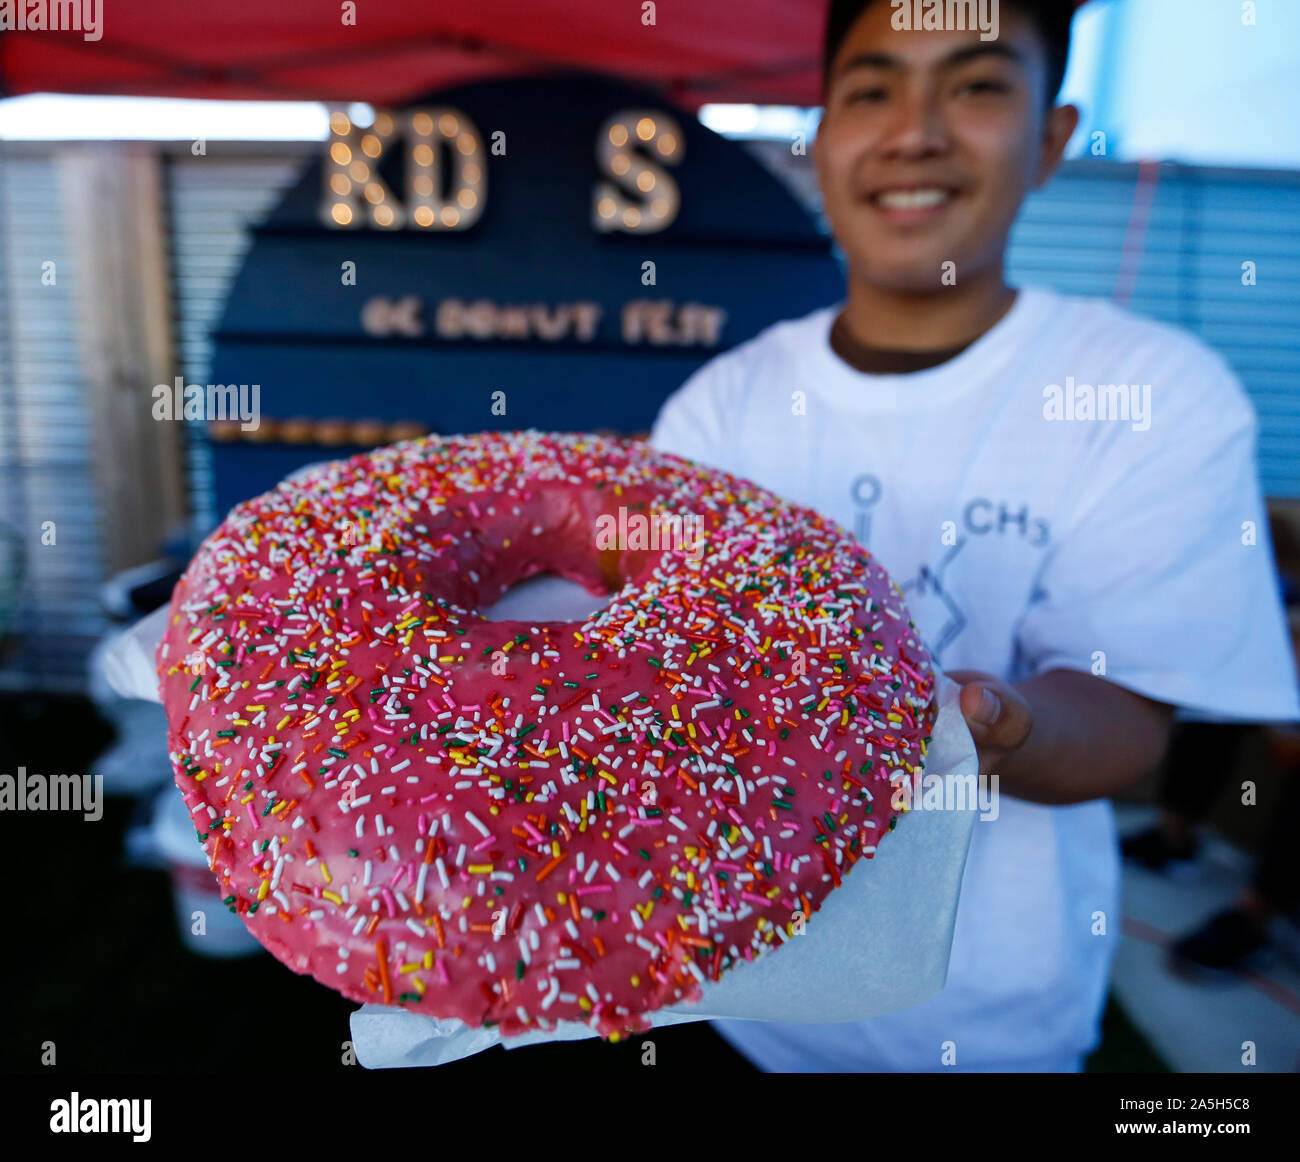 Anaheim, USA. 20th Oct, 2019. A vendor shows a giant donut at the Donut Festival Orange County held in Anaheim, the United States, Oct. 20, 2019. People enjoyed different kinds of donuts and drinks at the festival held on Sunday. Credit: Li Ying/Xinhua/Alamy Live News Stock Photo